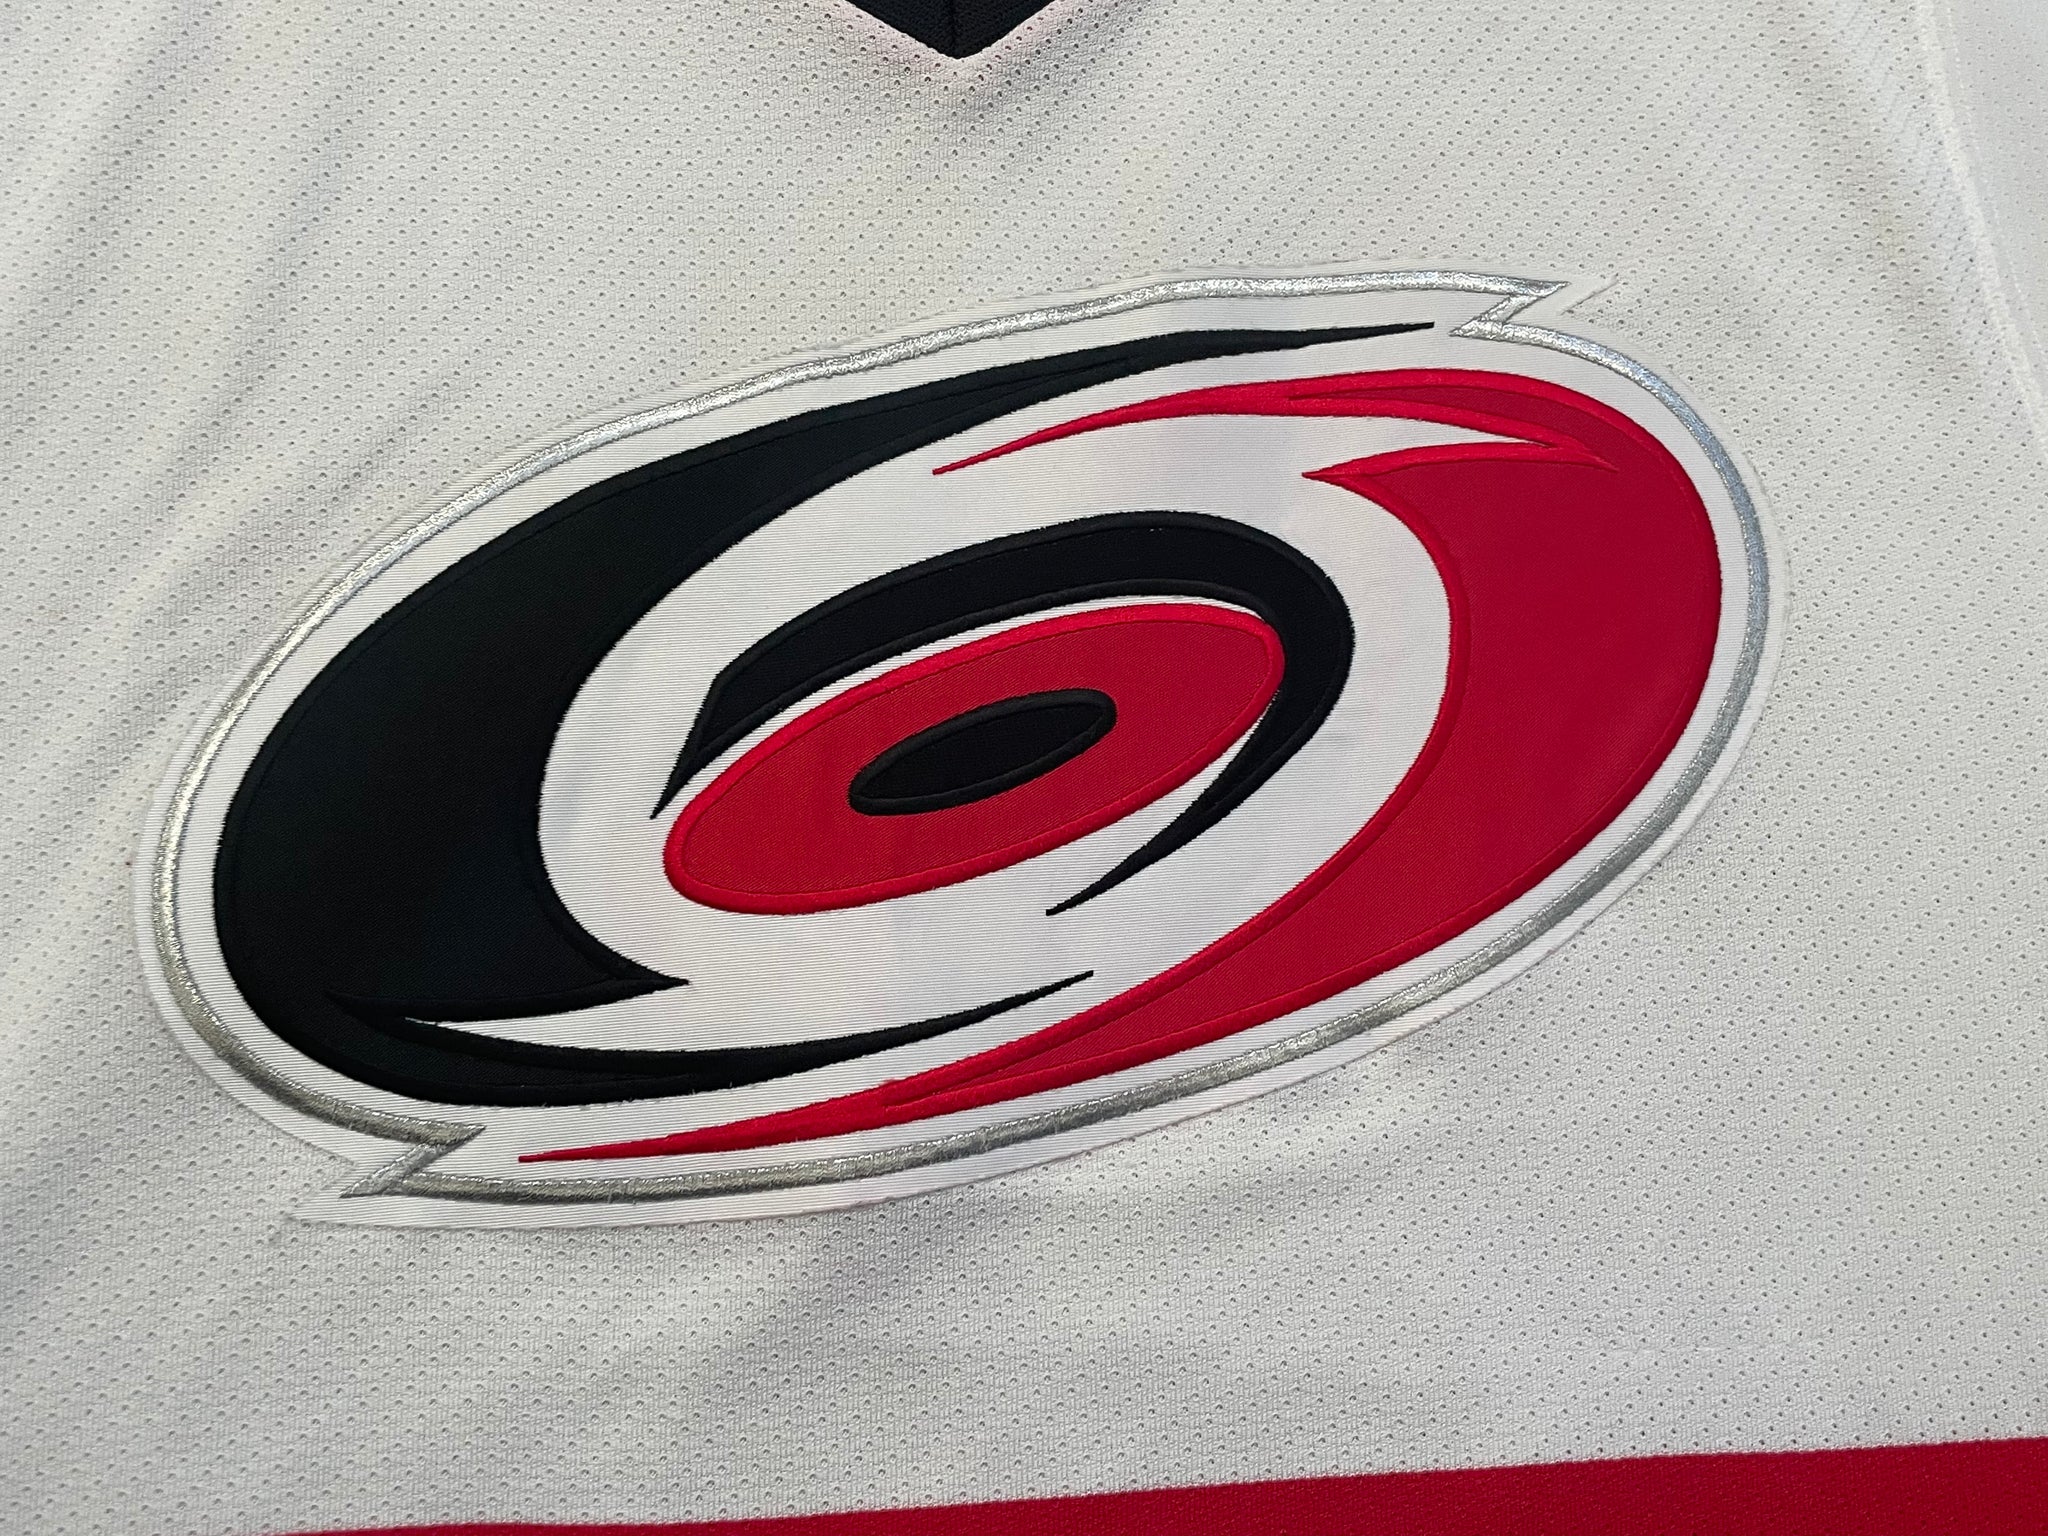 Carolina Hurricanes jersey by CCM 🏒 Marked Large, could fit XL